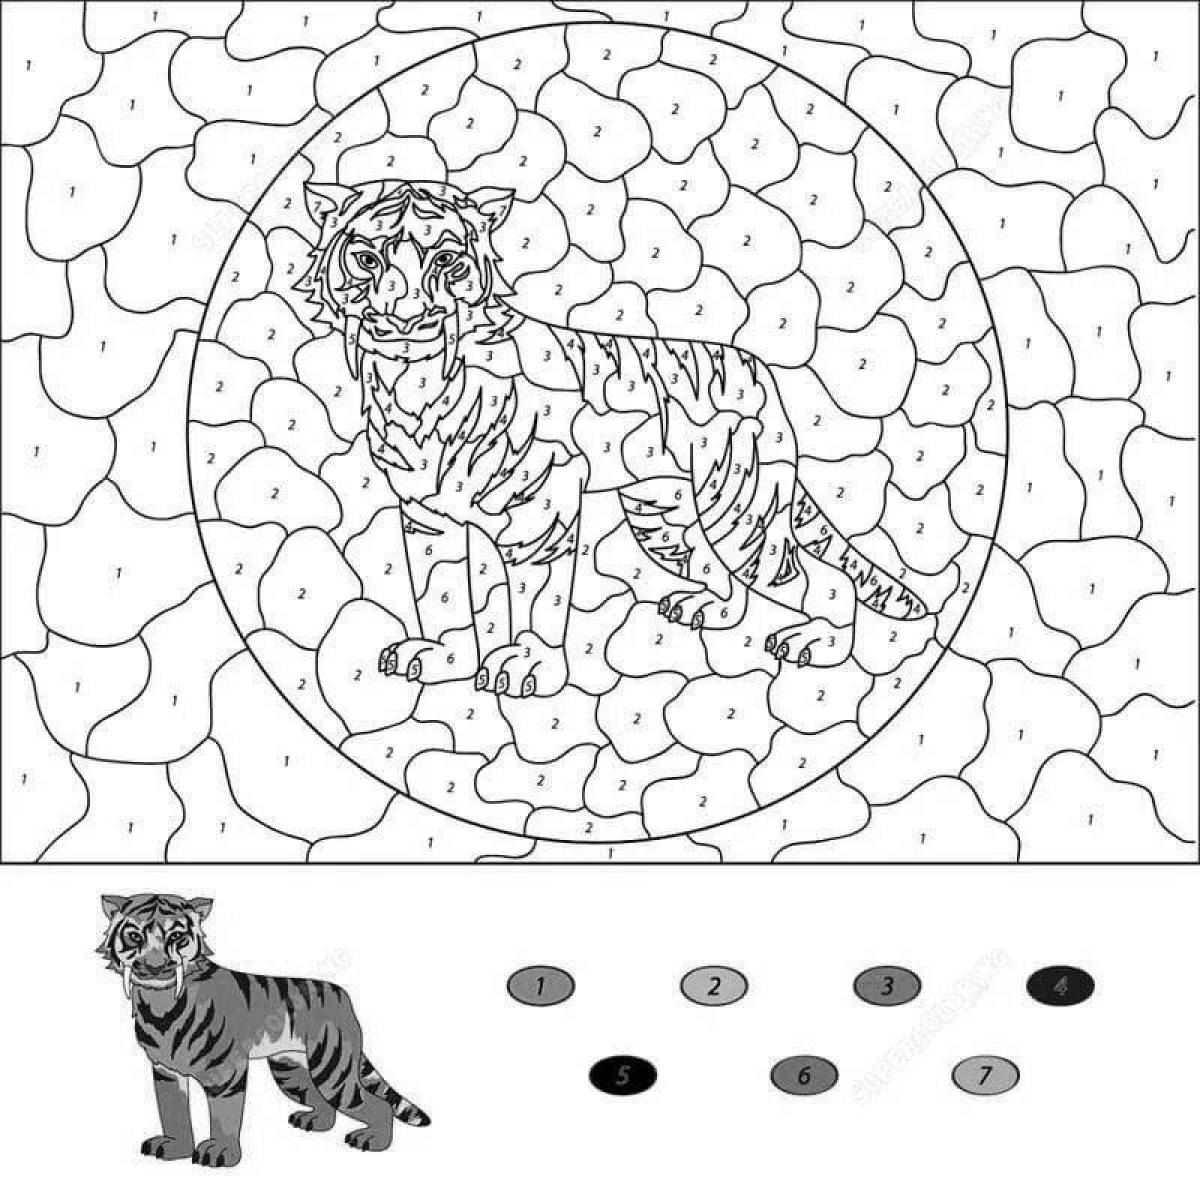 Bright animal coloring by numbers